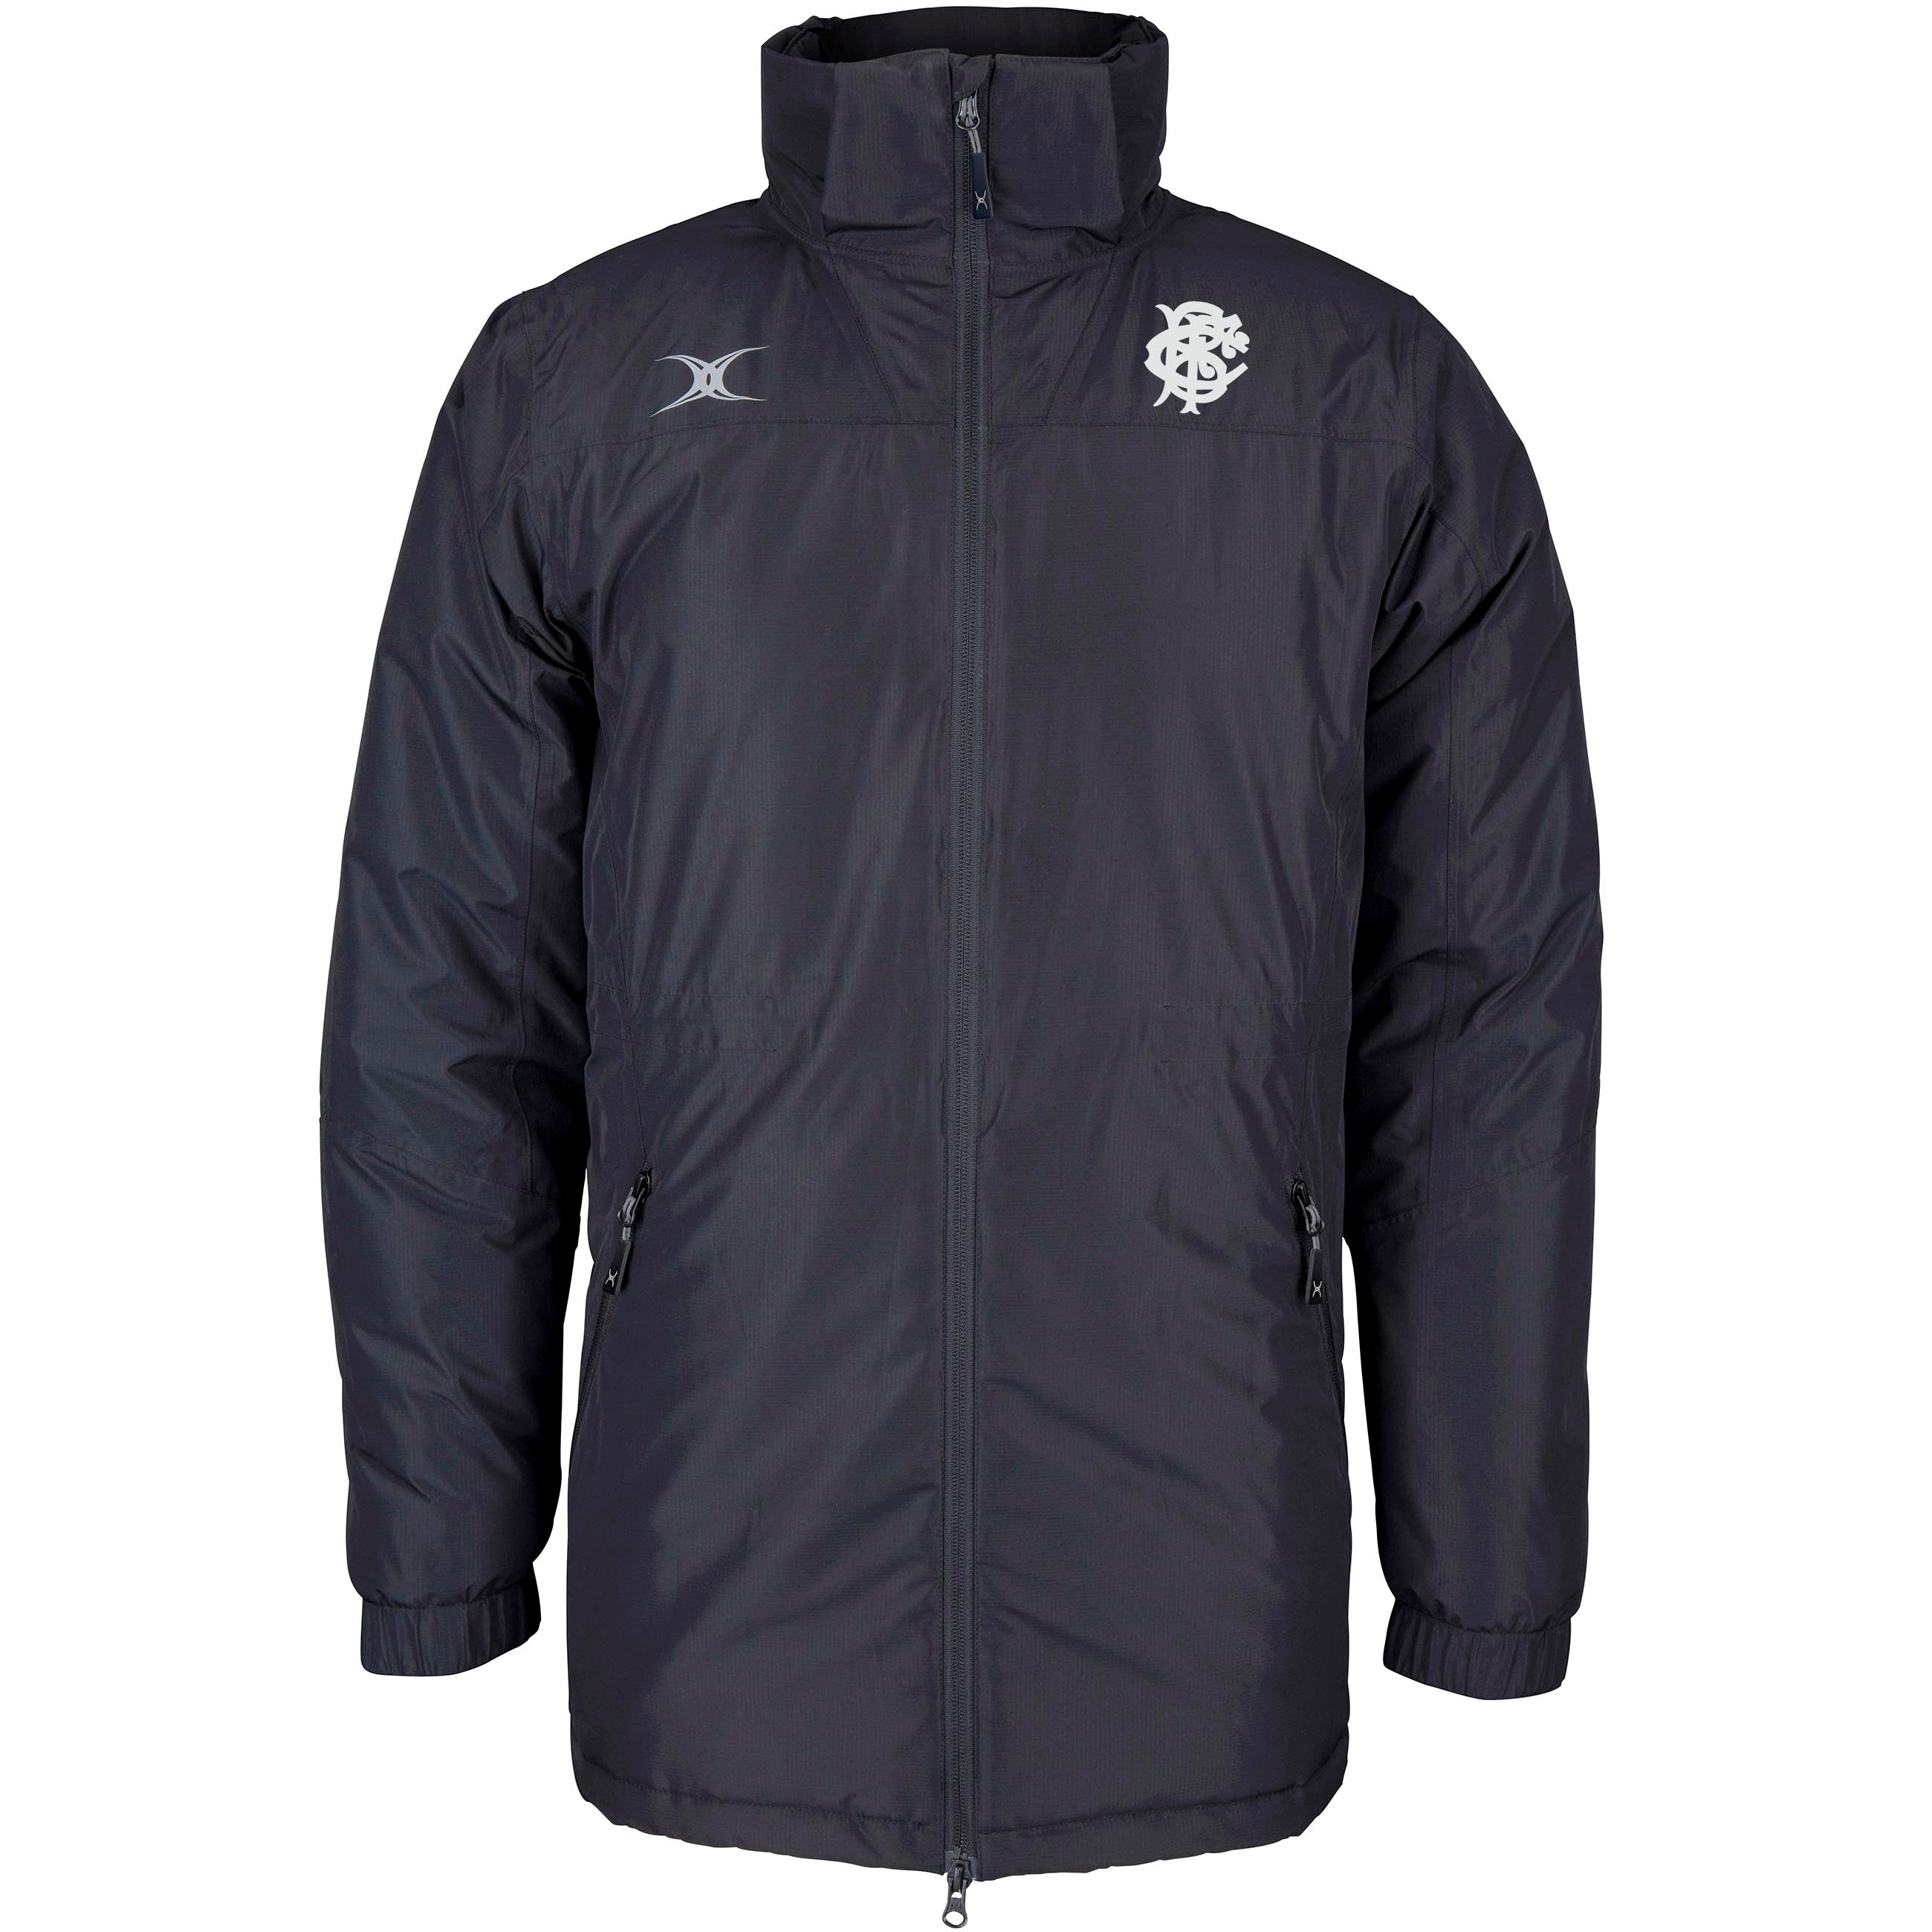 Barbarian FC Adult's All Weather Jacket - Black